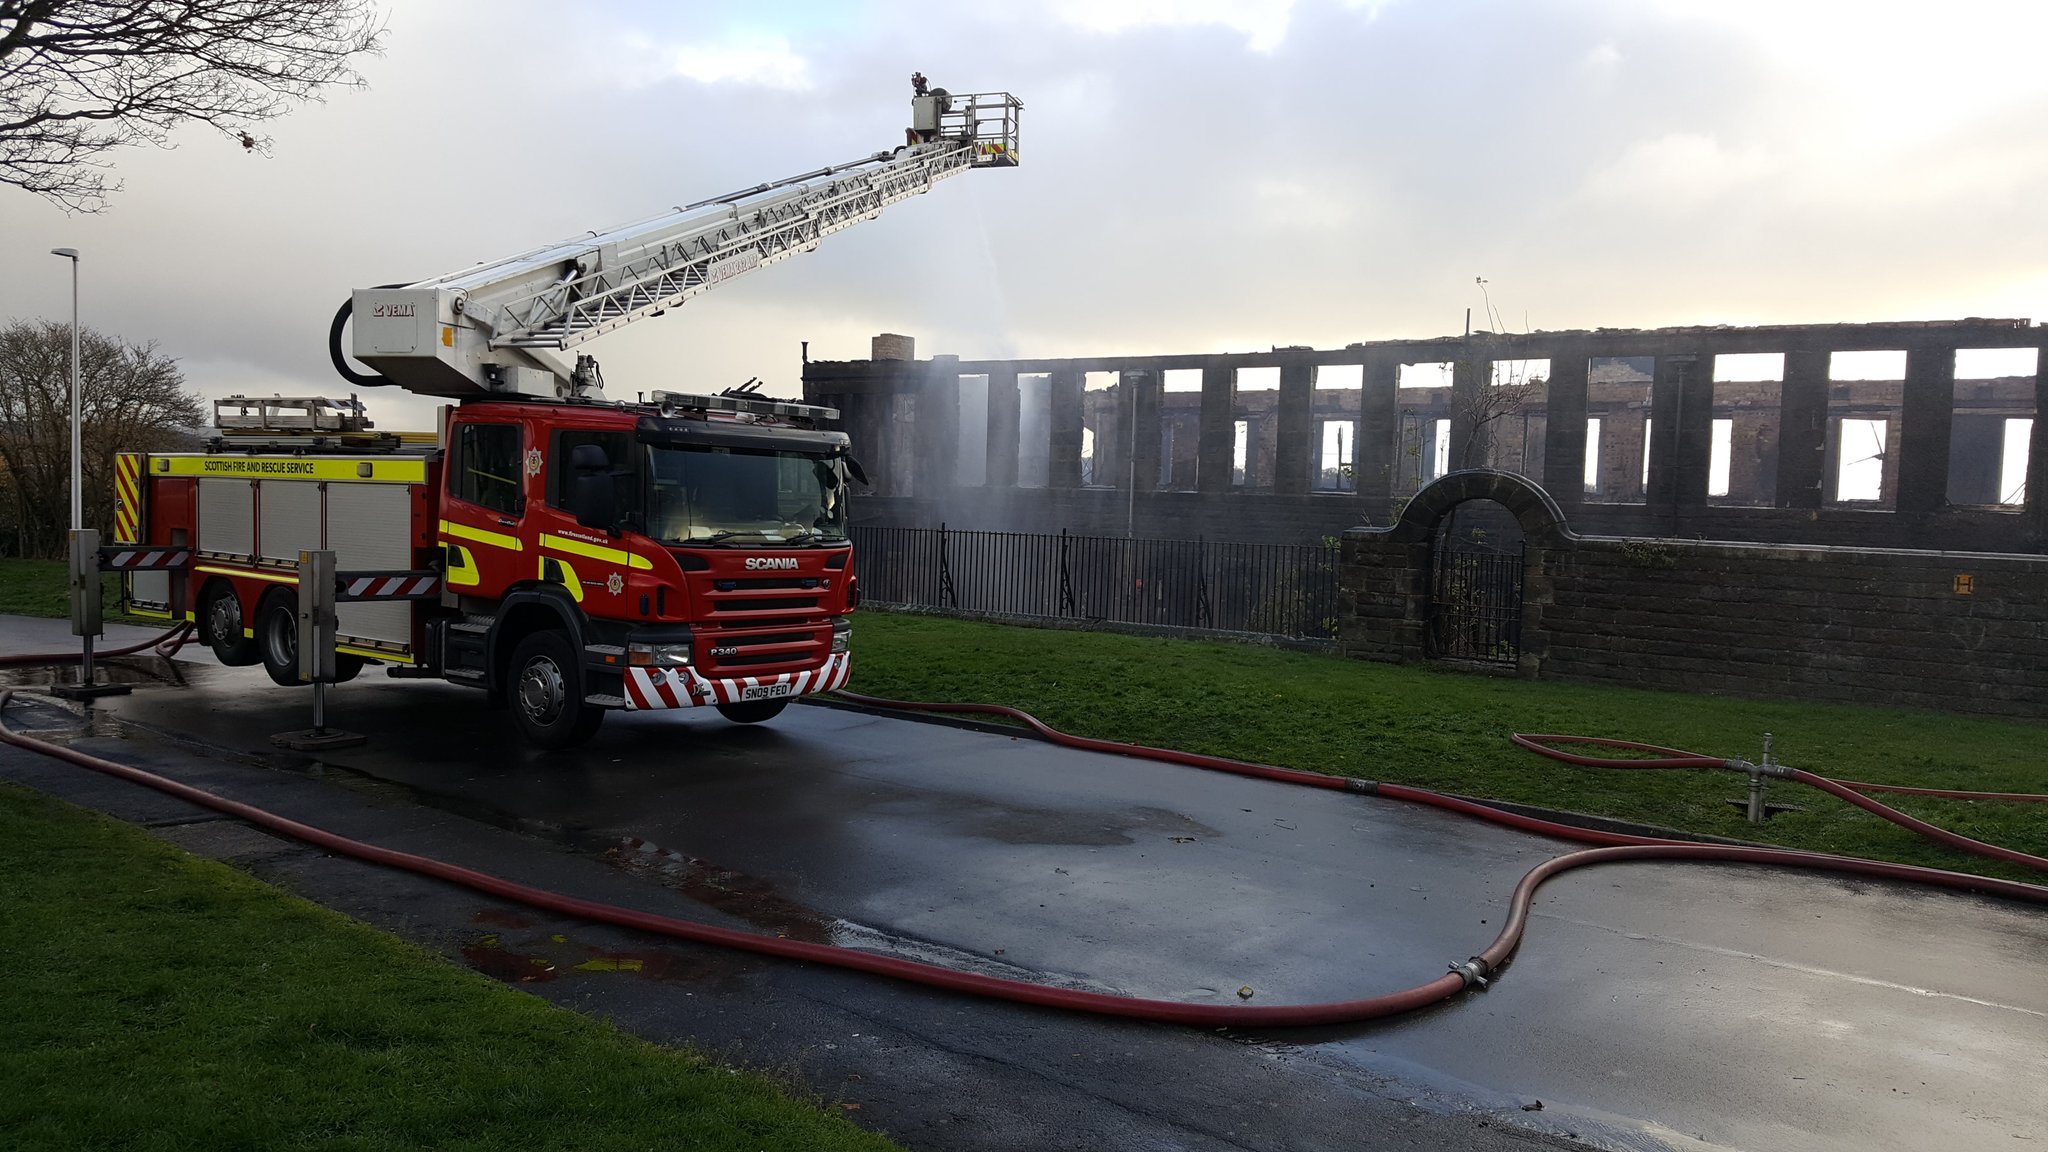 Fire engine at Inverkeithing Primary School after a huge fire in November 2018 (Scottish Fire and Rescue Service via Twitter)